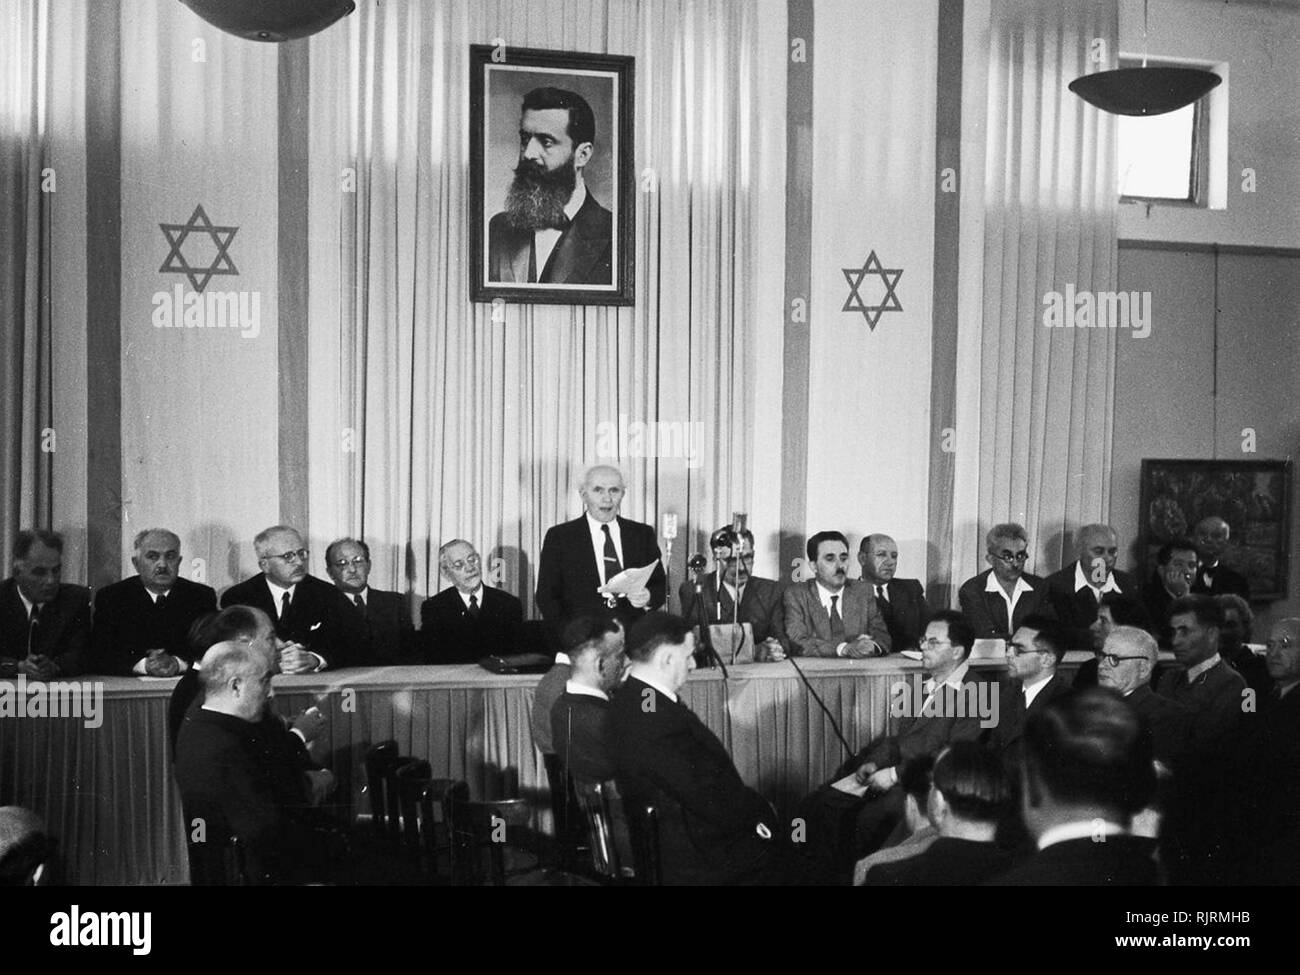 Declaration of the Establishment of the State of Israel (14 May 1948) by David Ben-Gurion, the Executive Head of the World Zionist Organization; Chairman of the Jewish Agency for Palestine, and soon to be first Prime Minister of Israel. Stock Photo